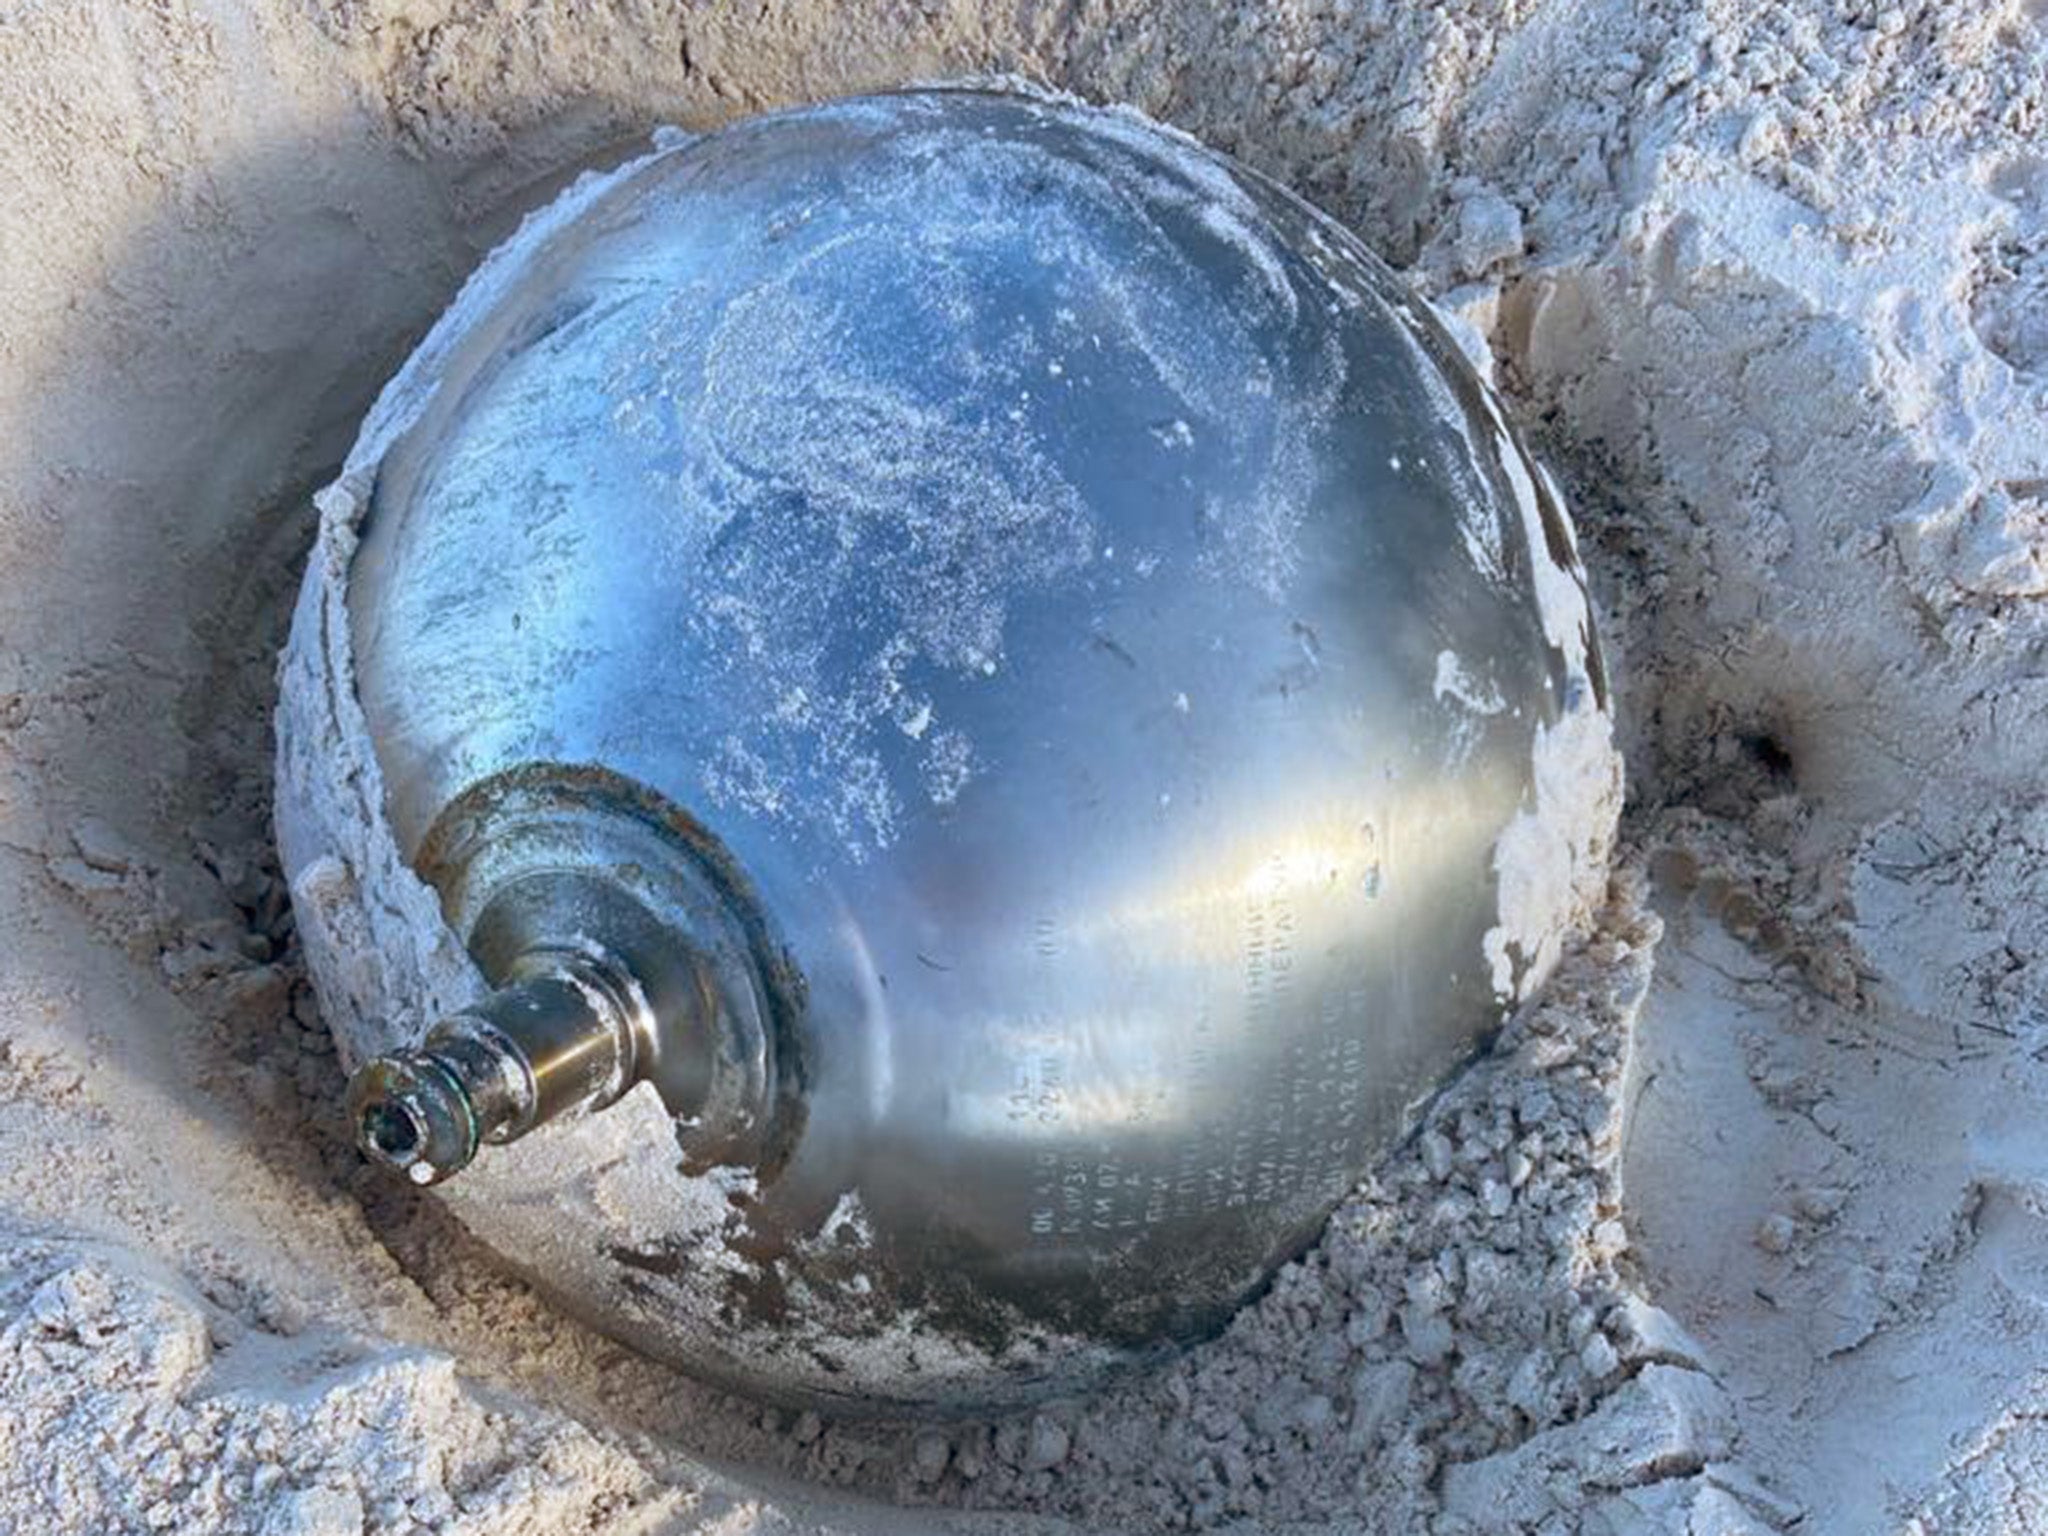 Manon Clarke spotted the 41kg reflective ball poking out of the sand while walking with her family at Harbour Island